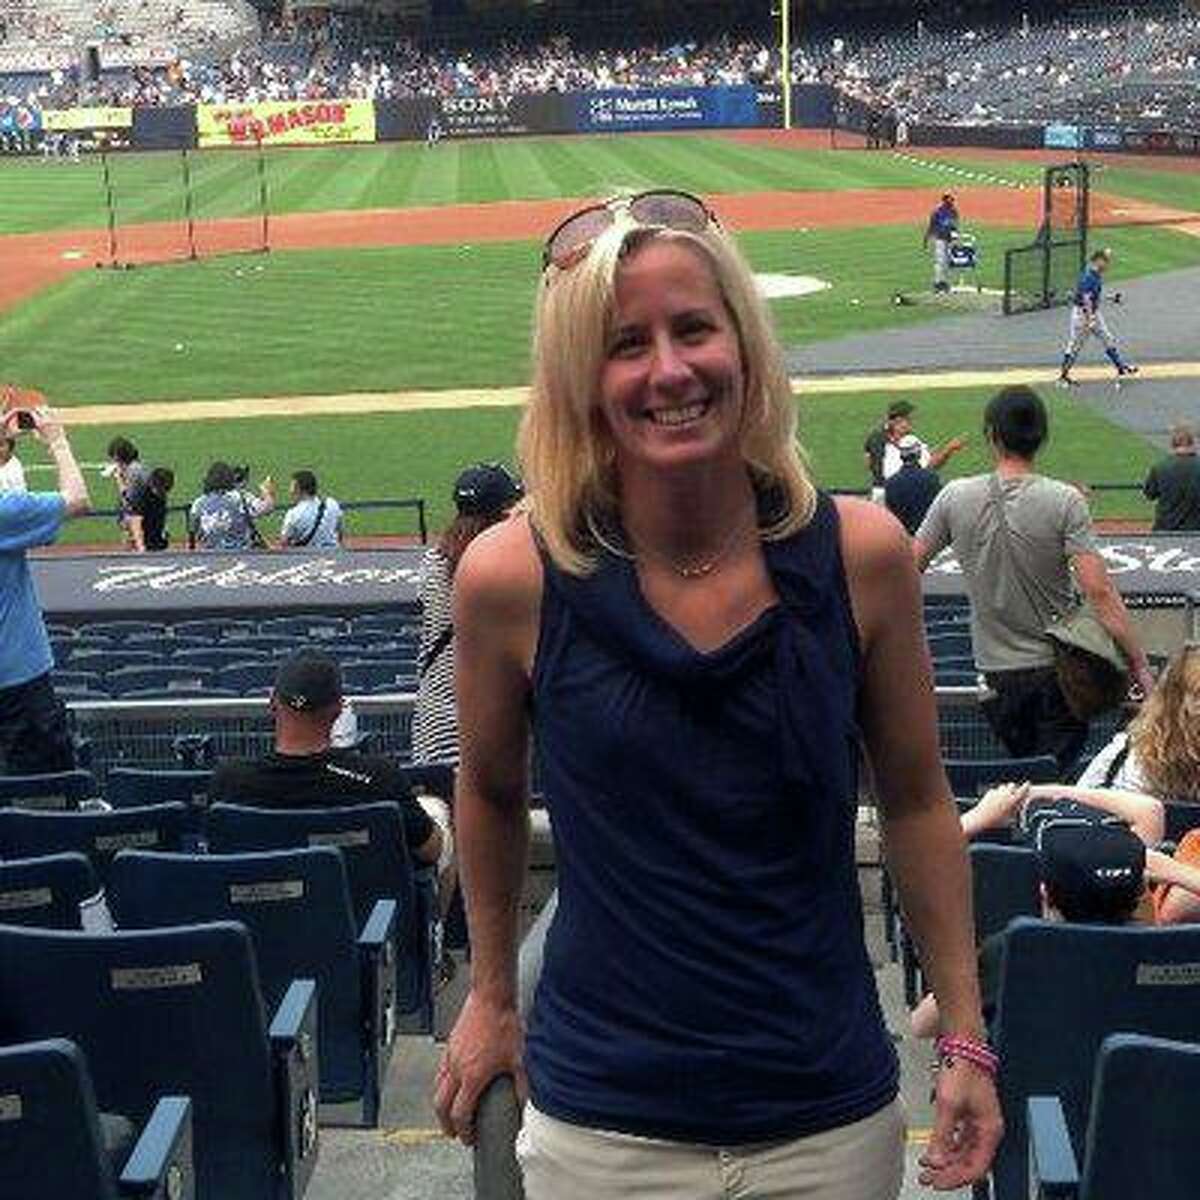 Wallingford native Kelly Rodman, who worked as a scout for the Yankees.